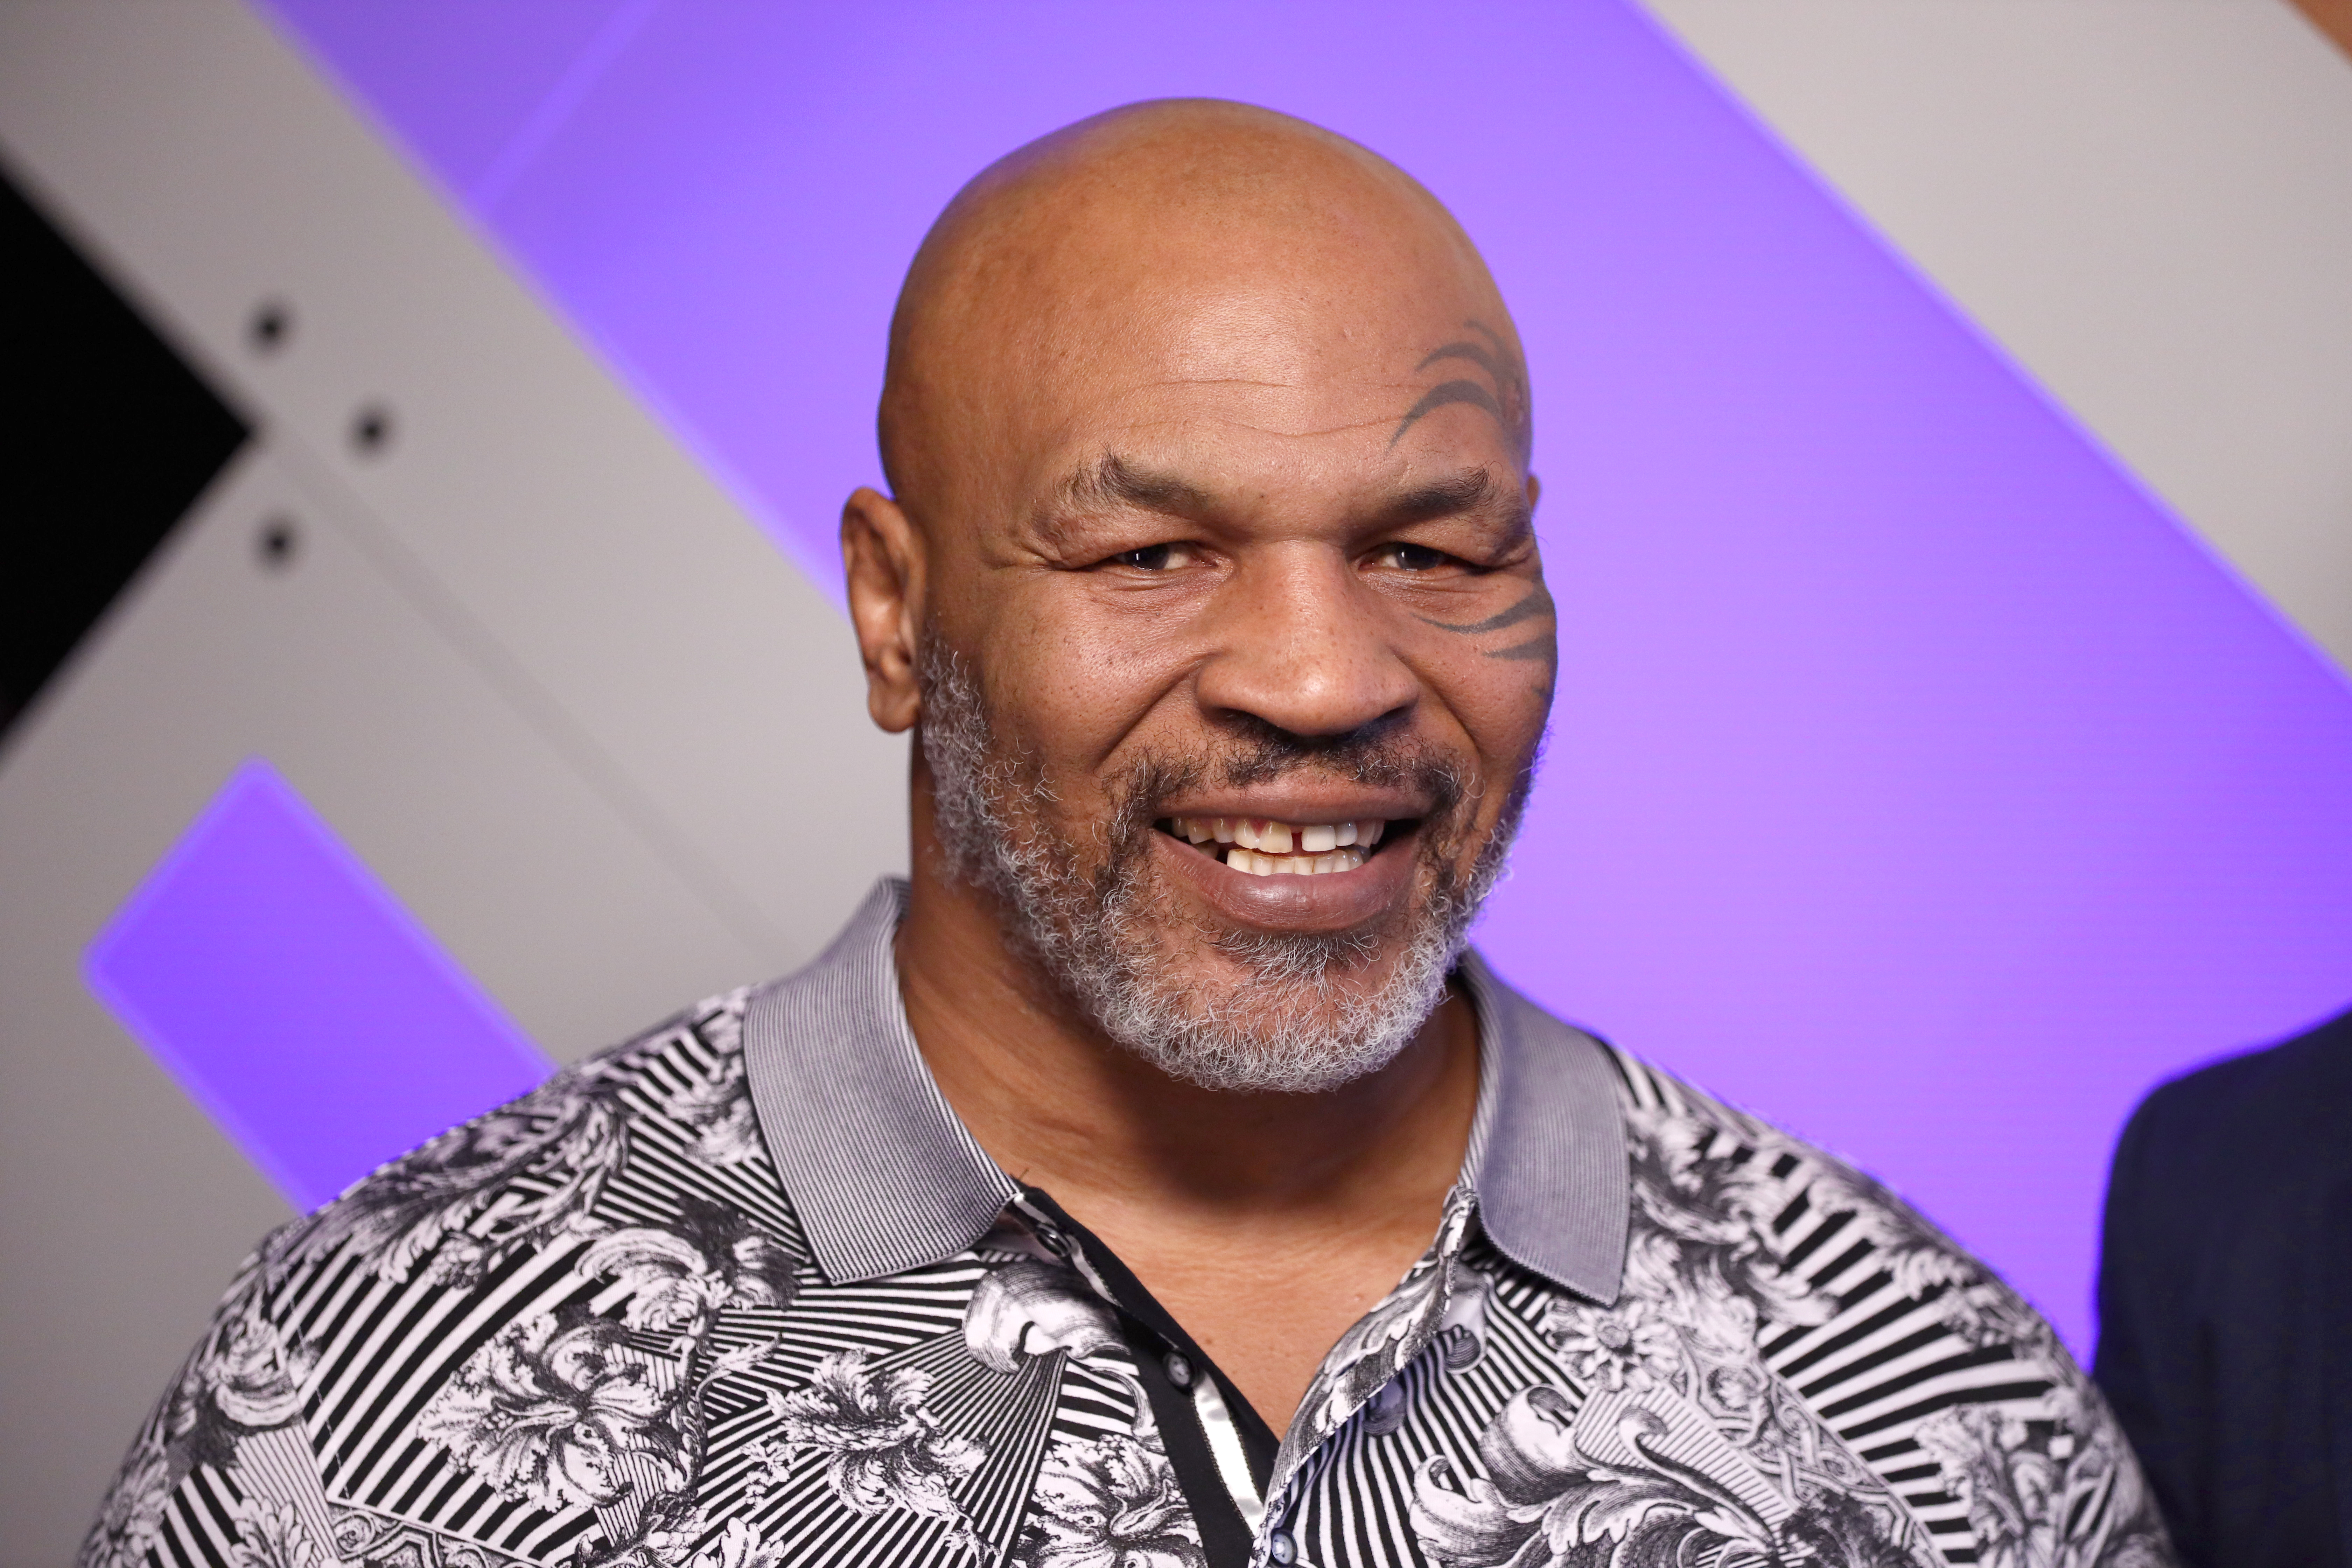 Mike Tyson Claims He Tried To Bribe A Zookeeper $10K To Let Him Fight A Gorilla